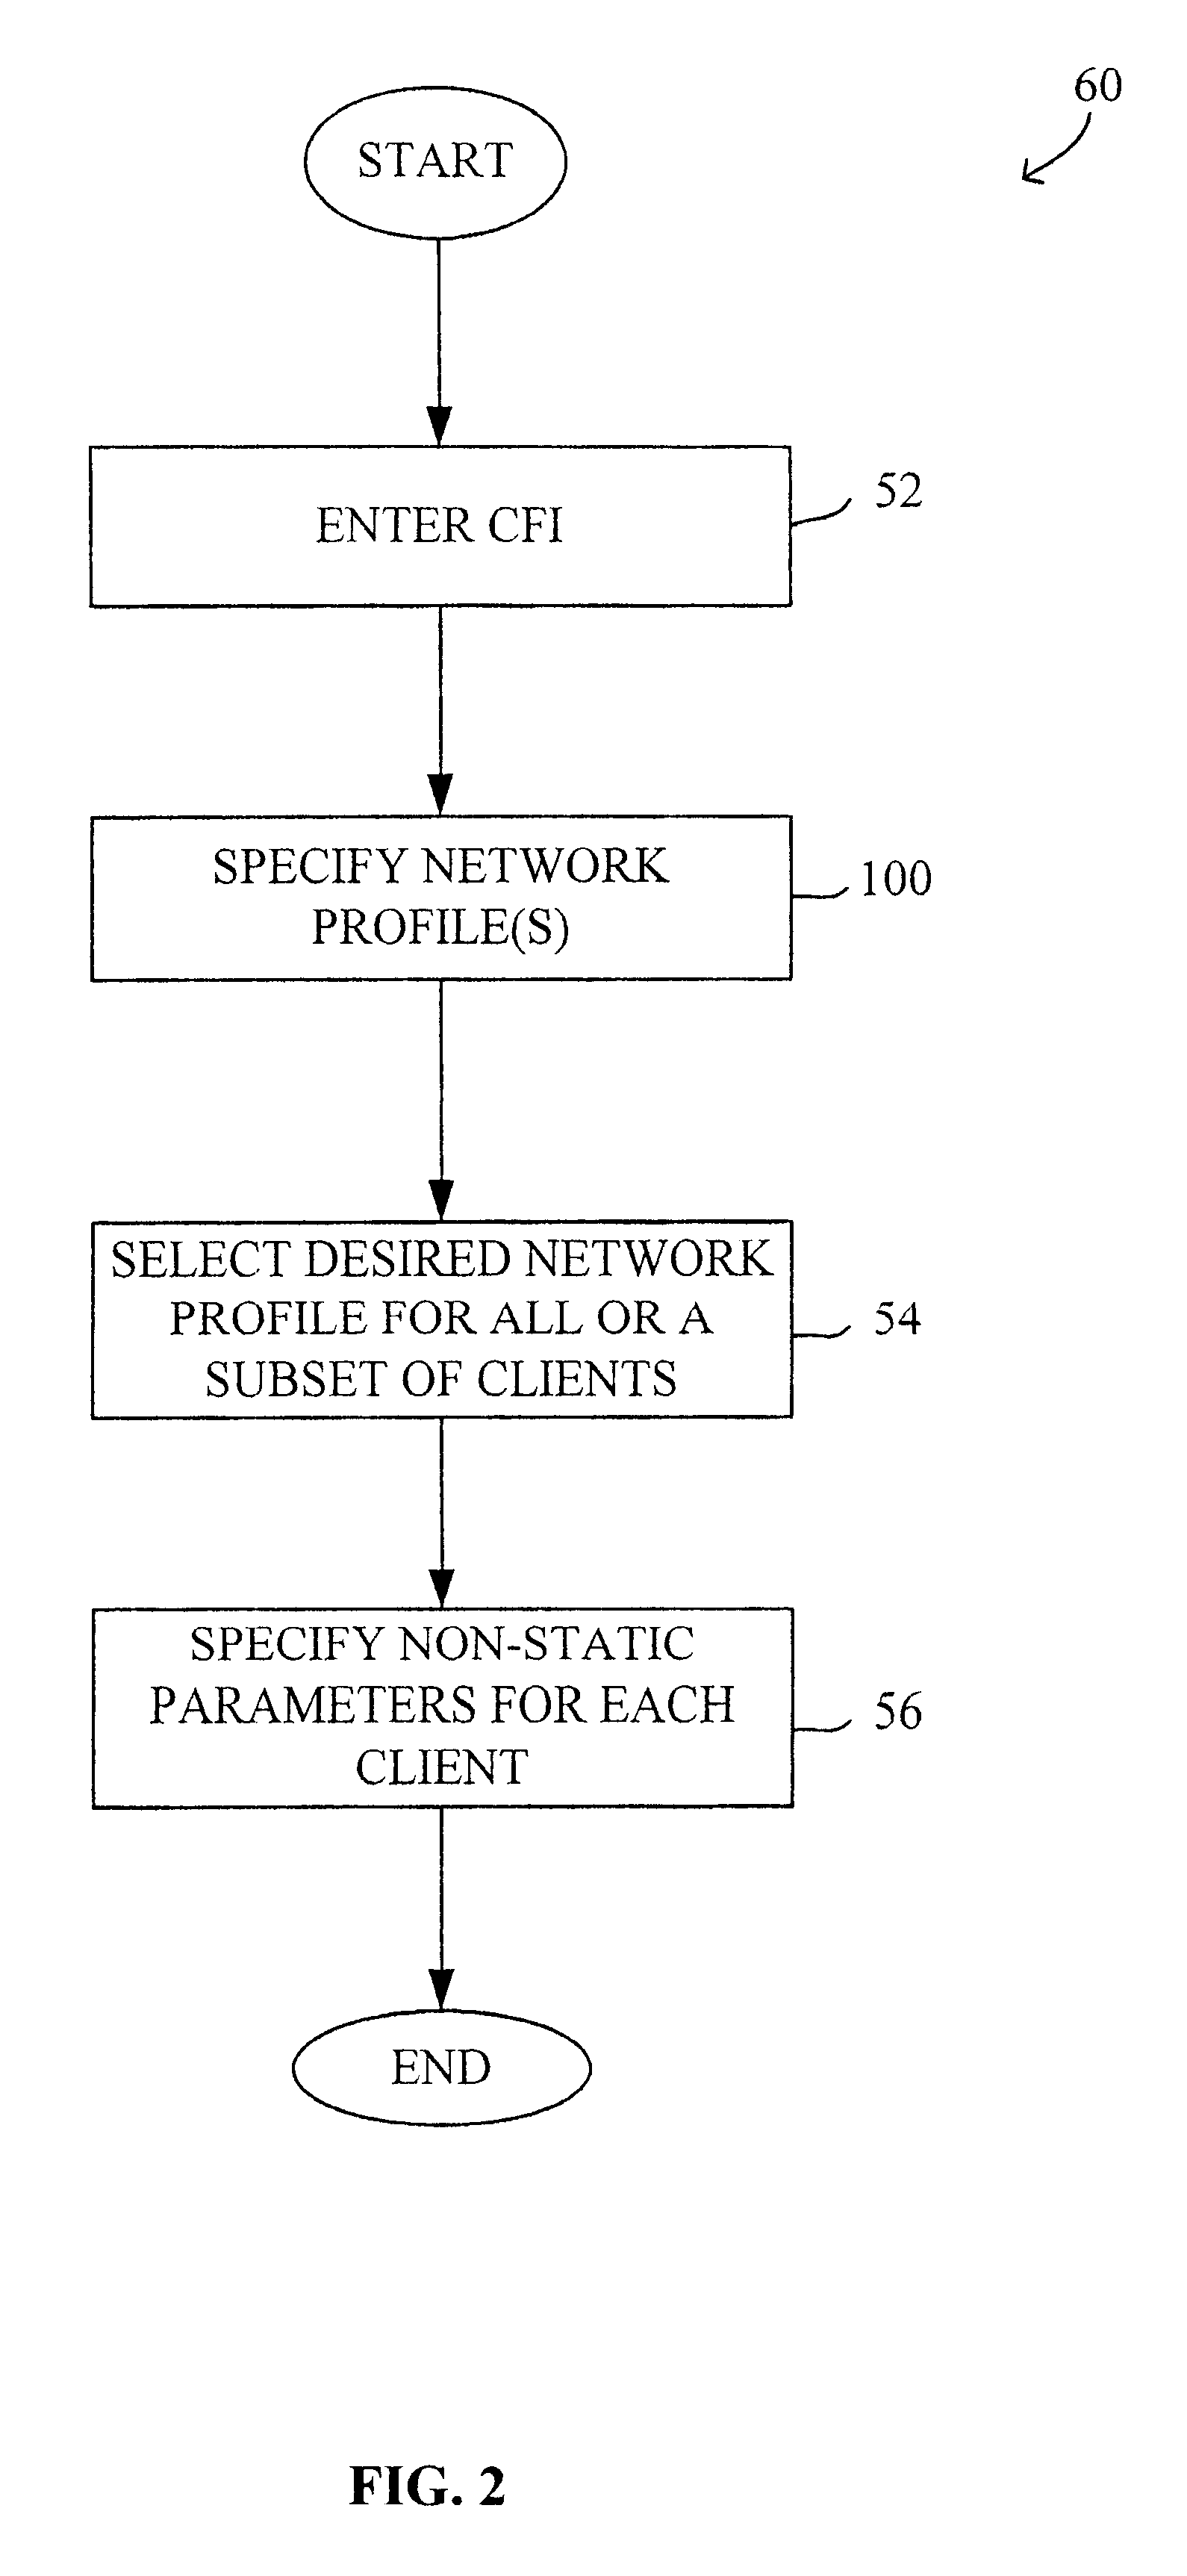 Network profiling system